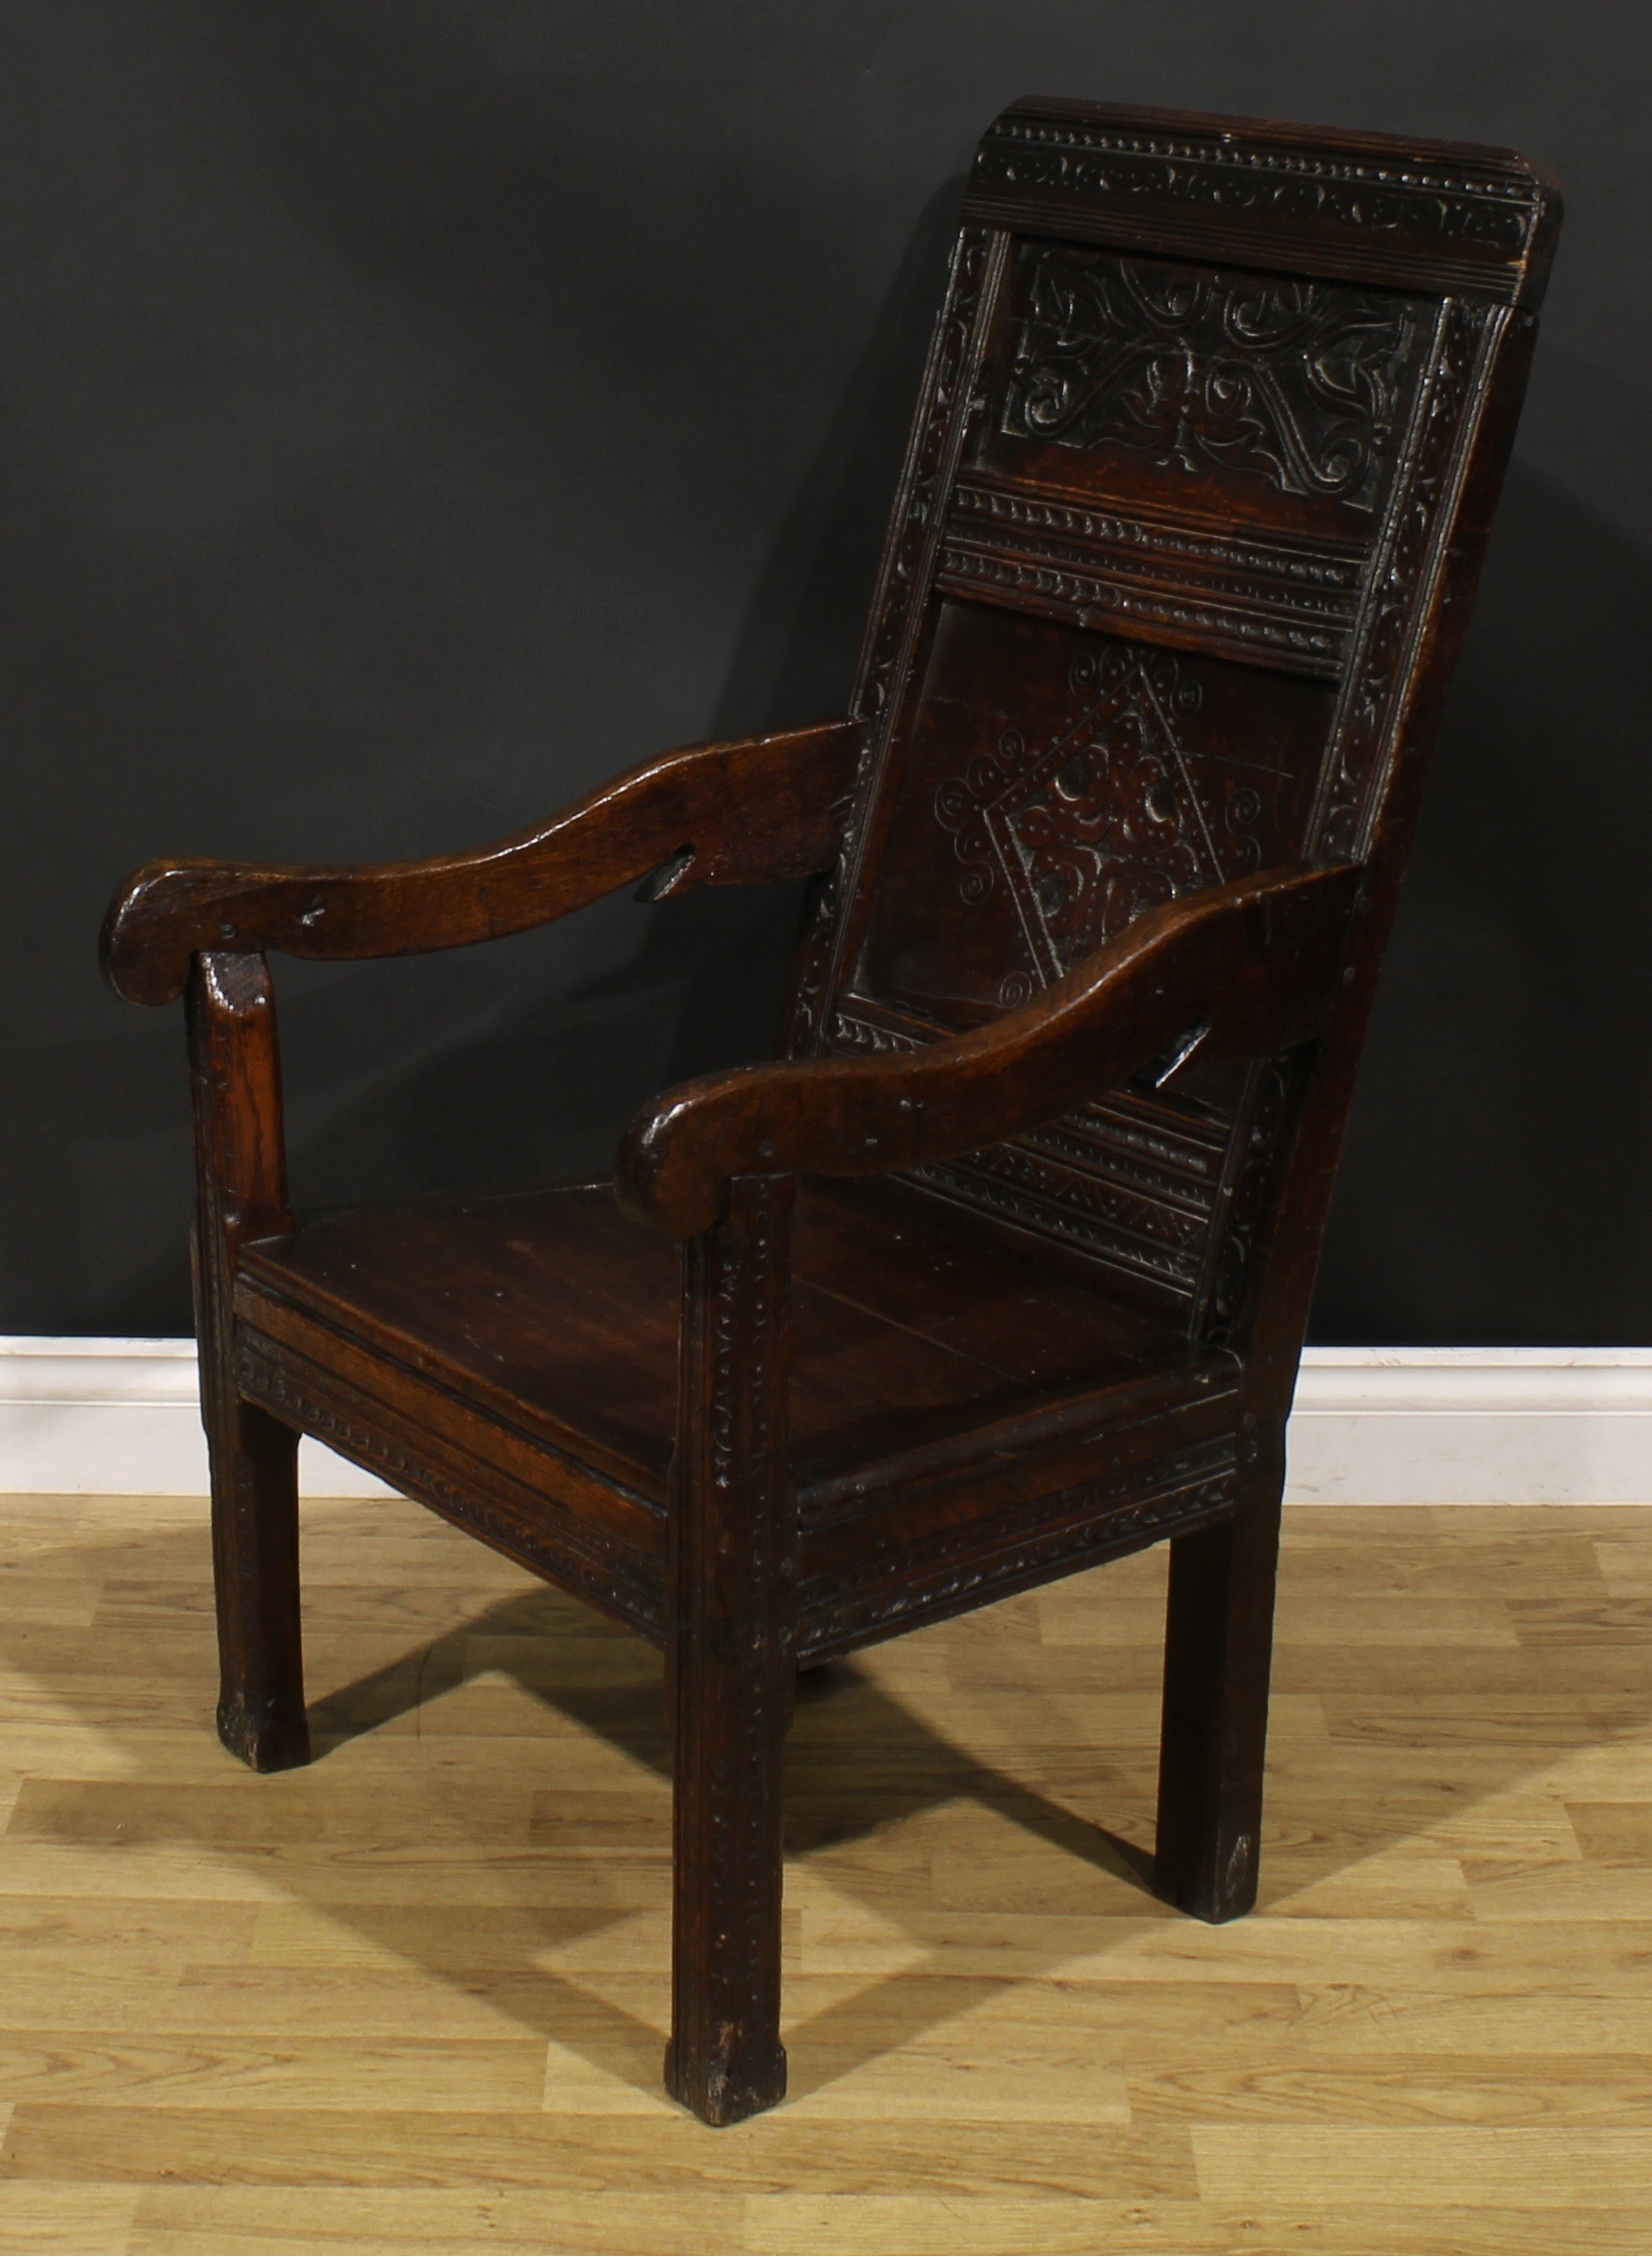 A 17th century oak wainscot armchair, rectangular panel back carved with lozenges and leafy scrolls, - Image 3 of 4